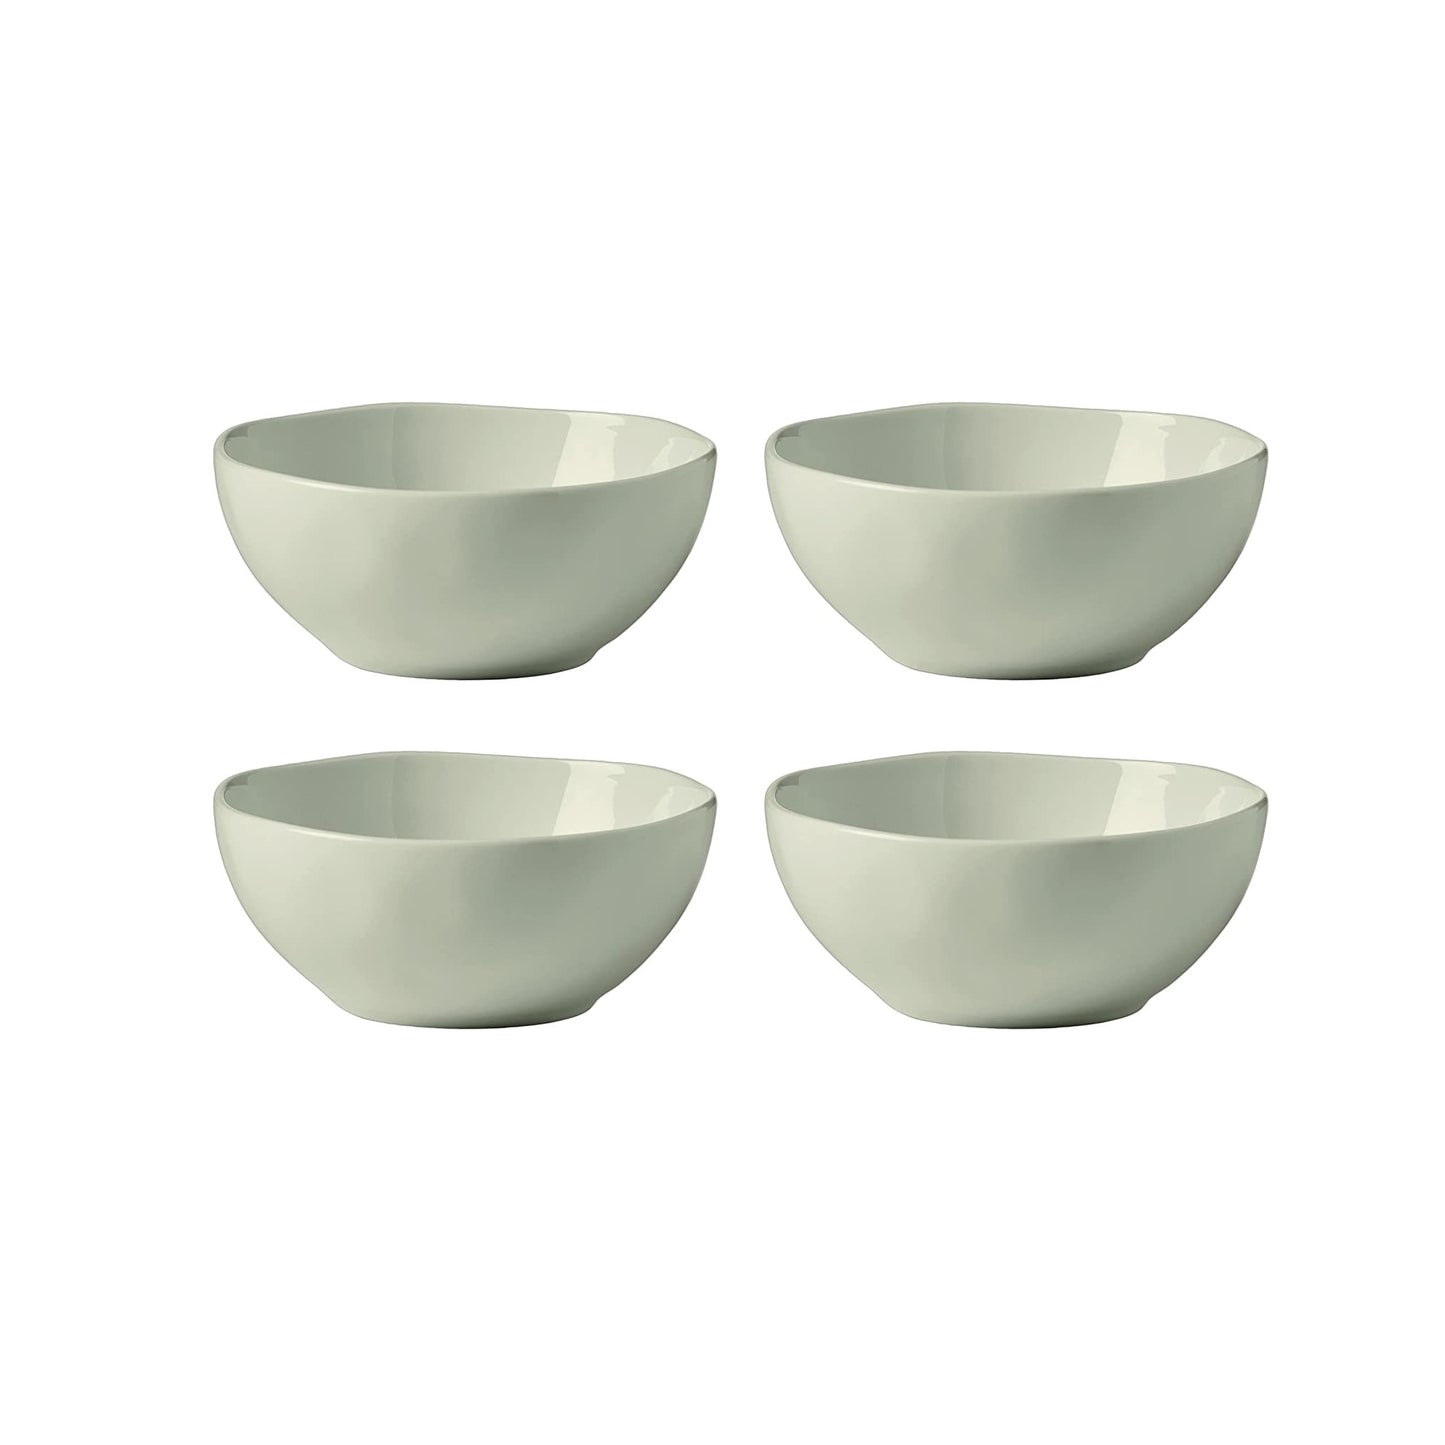 Bay Colors All Purpose Bowls White, Set of 4 by Lenox